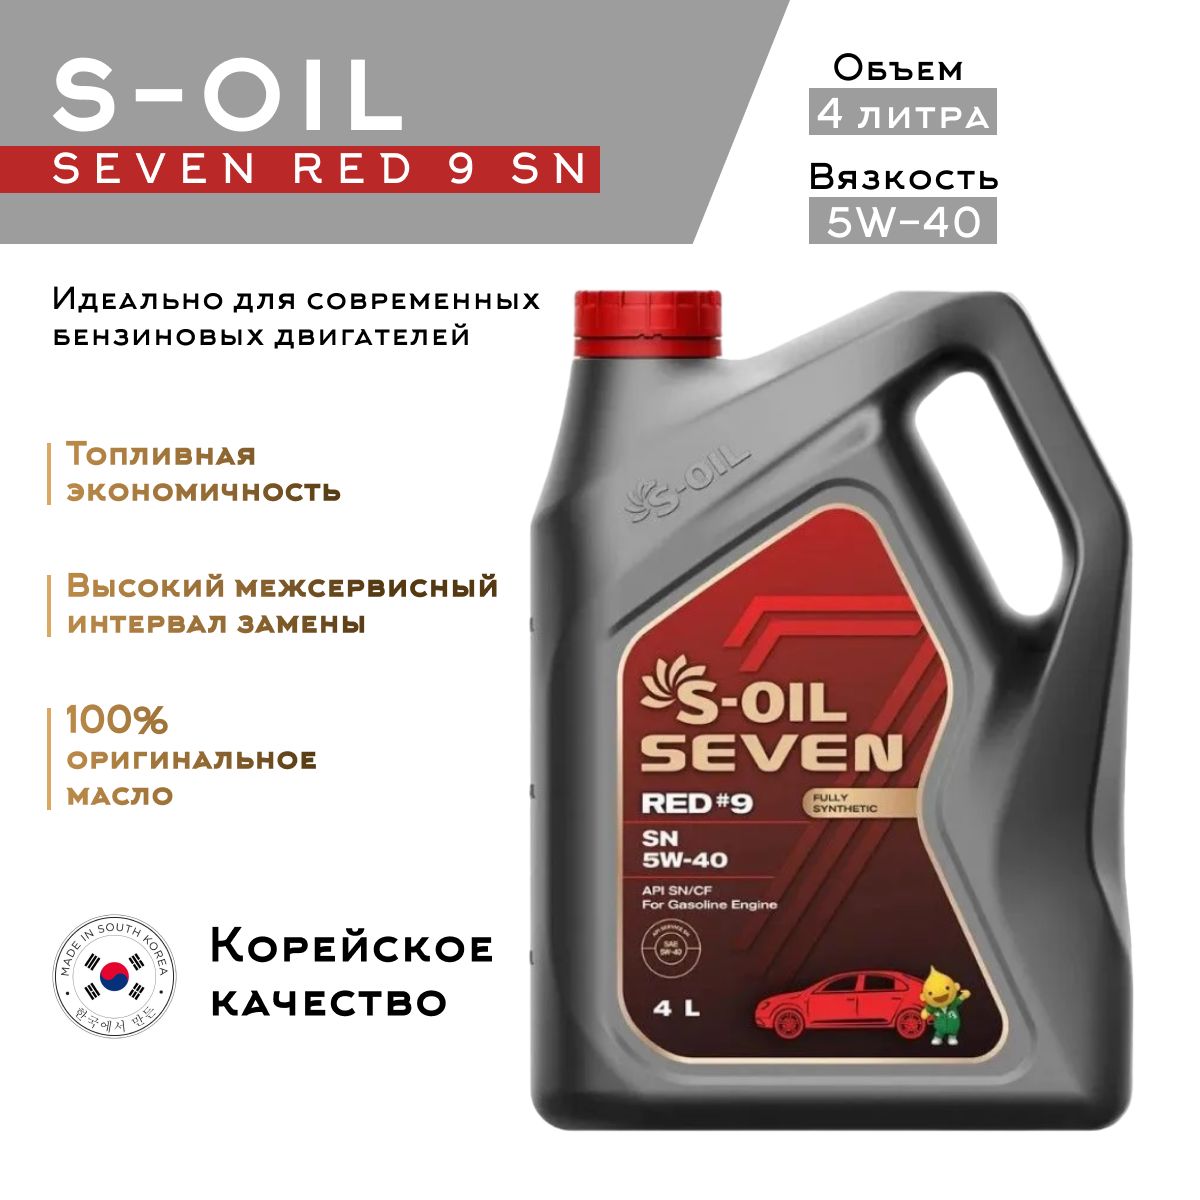 Купить масло sp 5w30. S-Oil Seven Red#9 SP 5w-30. S-Oil Seven 5w-30. Моторное масло Ойл Севен. S-Oil Seven 5w-30 Gold 9.